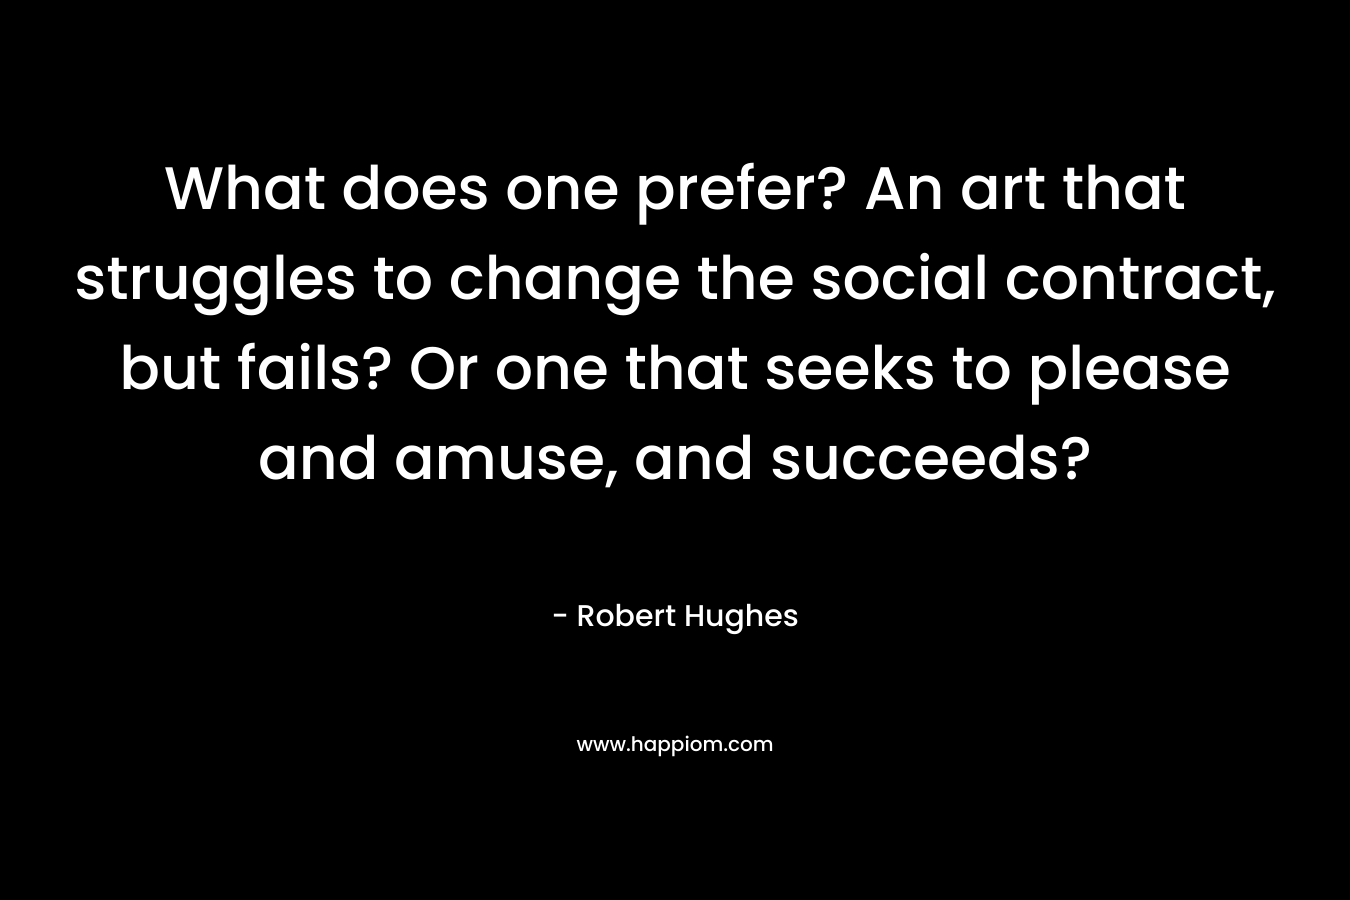 What does one prefer? An art that struggles to change the social contract, but fails? Or one that seeks to please and amuse, and succeeds? – Robert Hughes